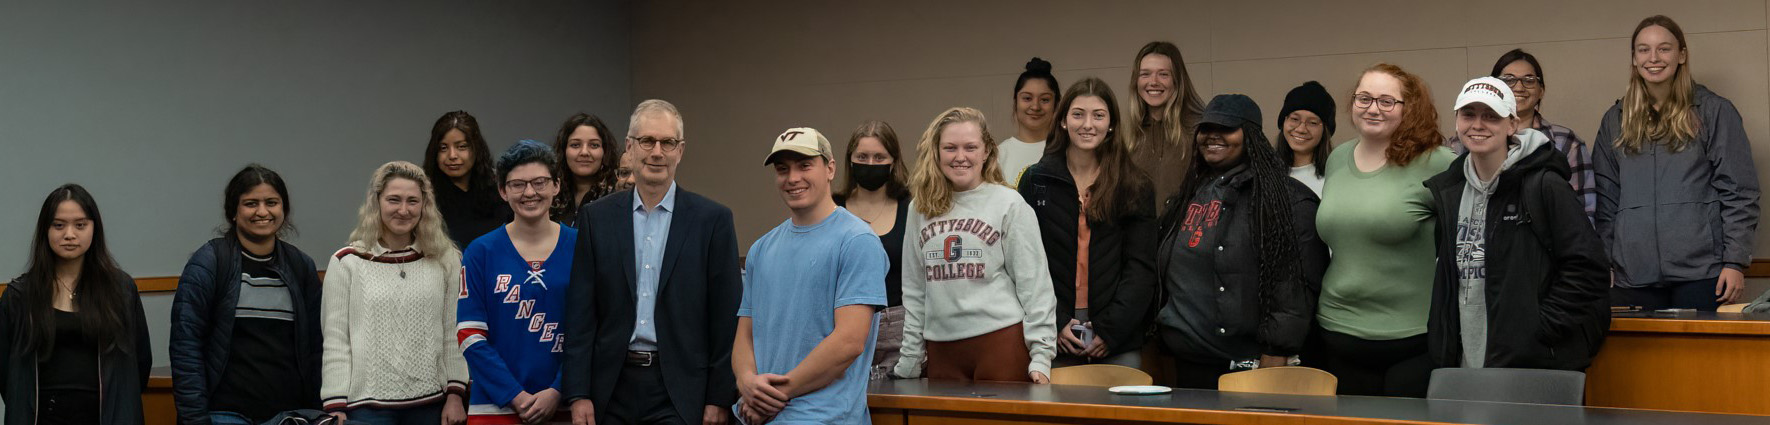 An image of a professor with a group of students.